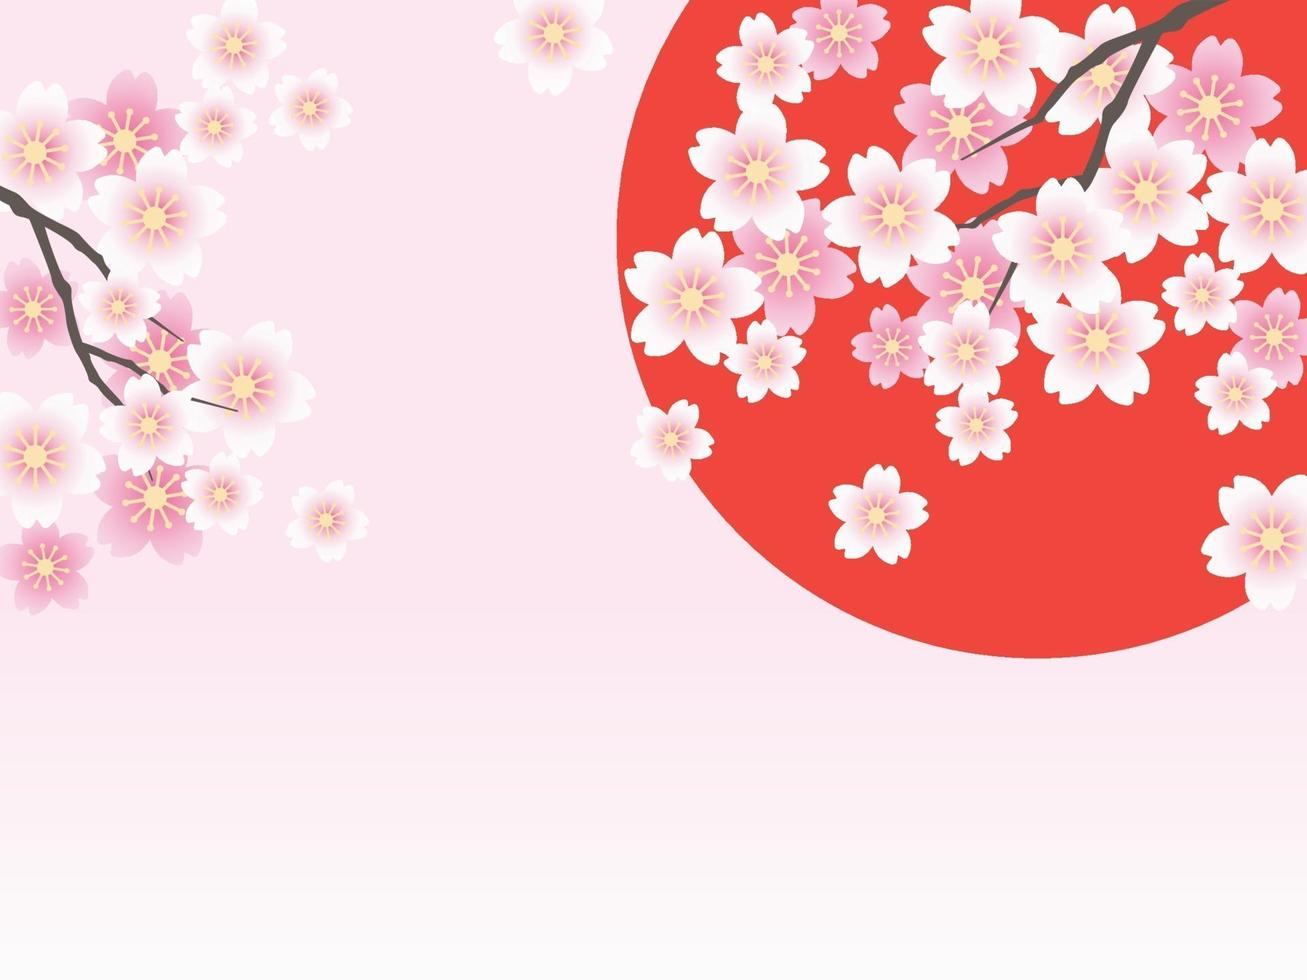 Vector Background Illustration With The Rising Sun, Cherry Blossoms In Full Bloom, And Text Space.